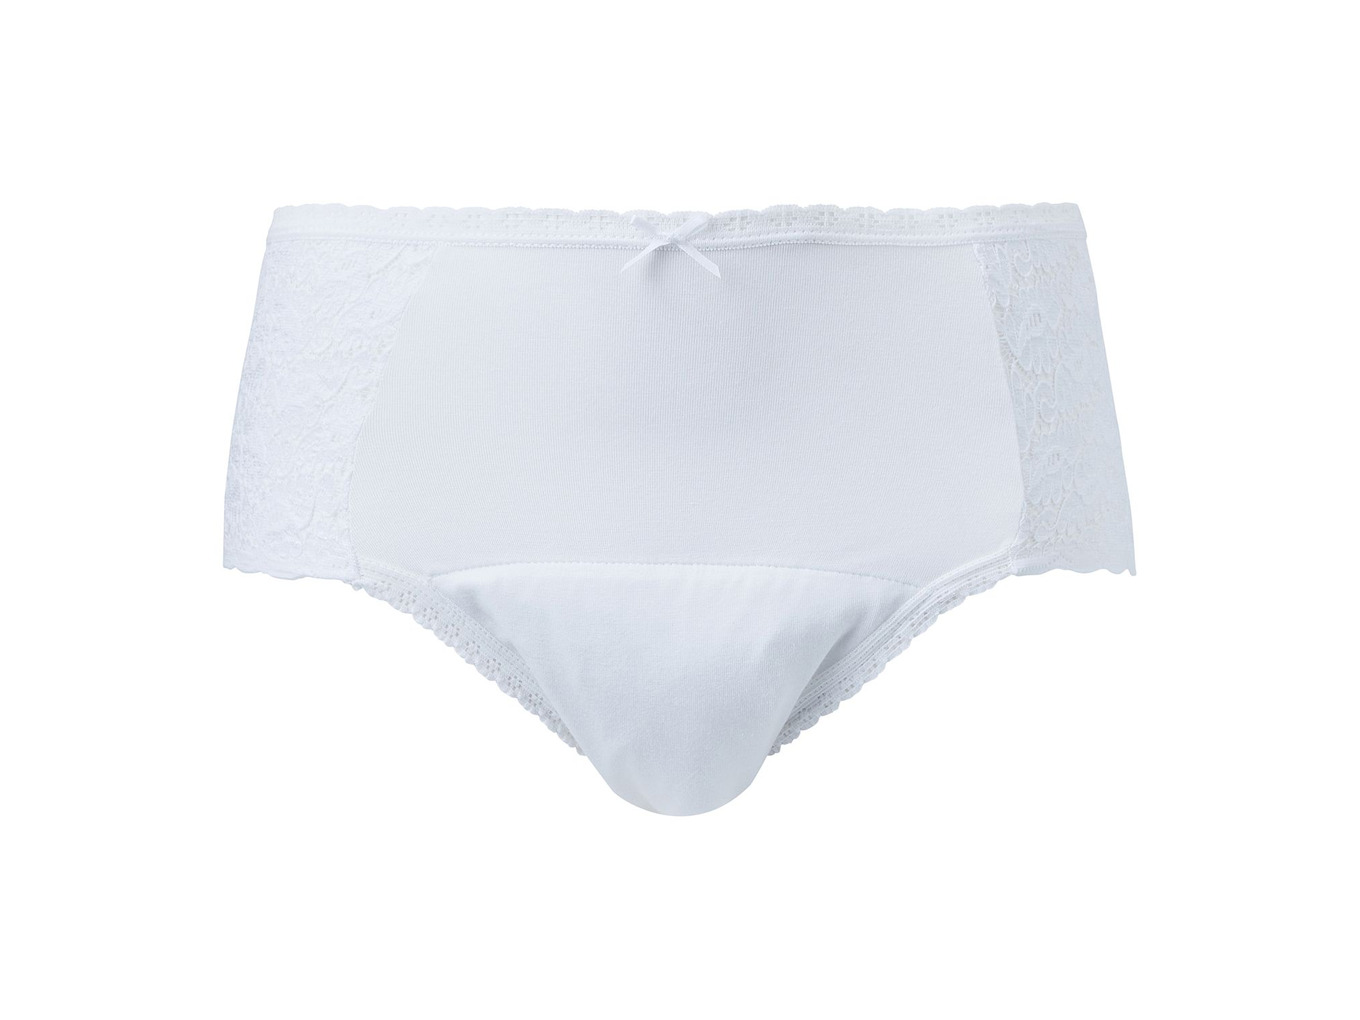 Drylife Ladies Washable Lace Incontinence Underwear White